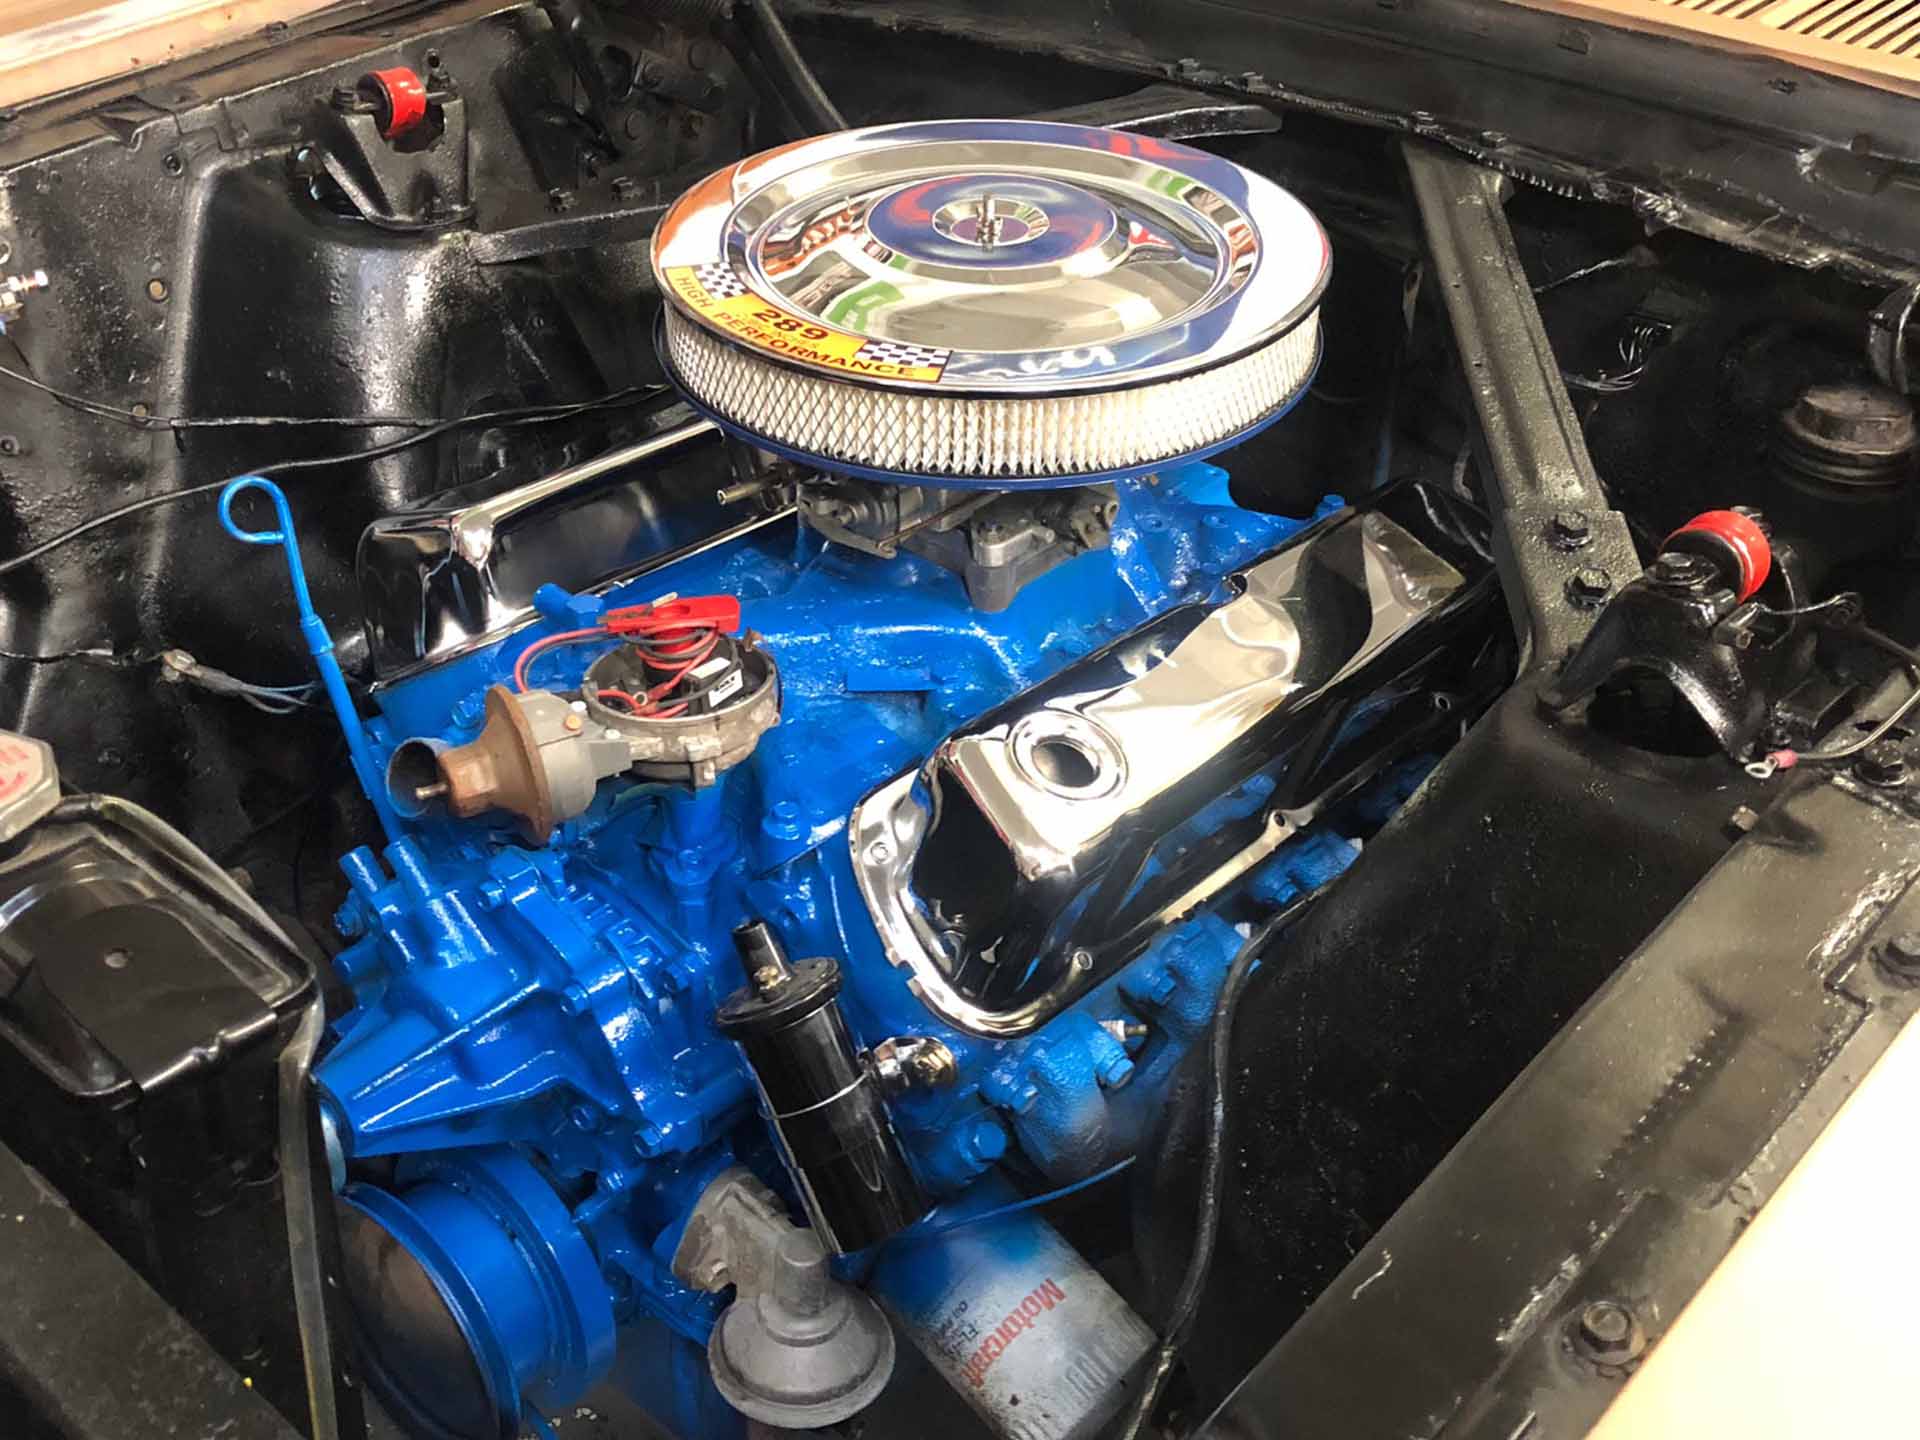 65 Mustang Engine after